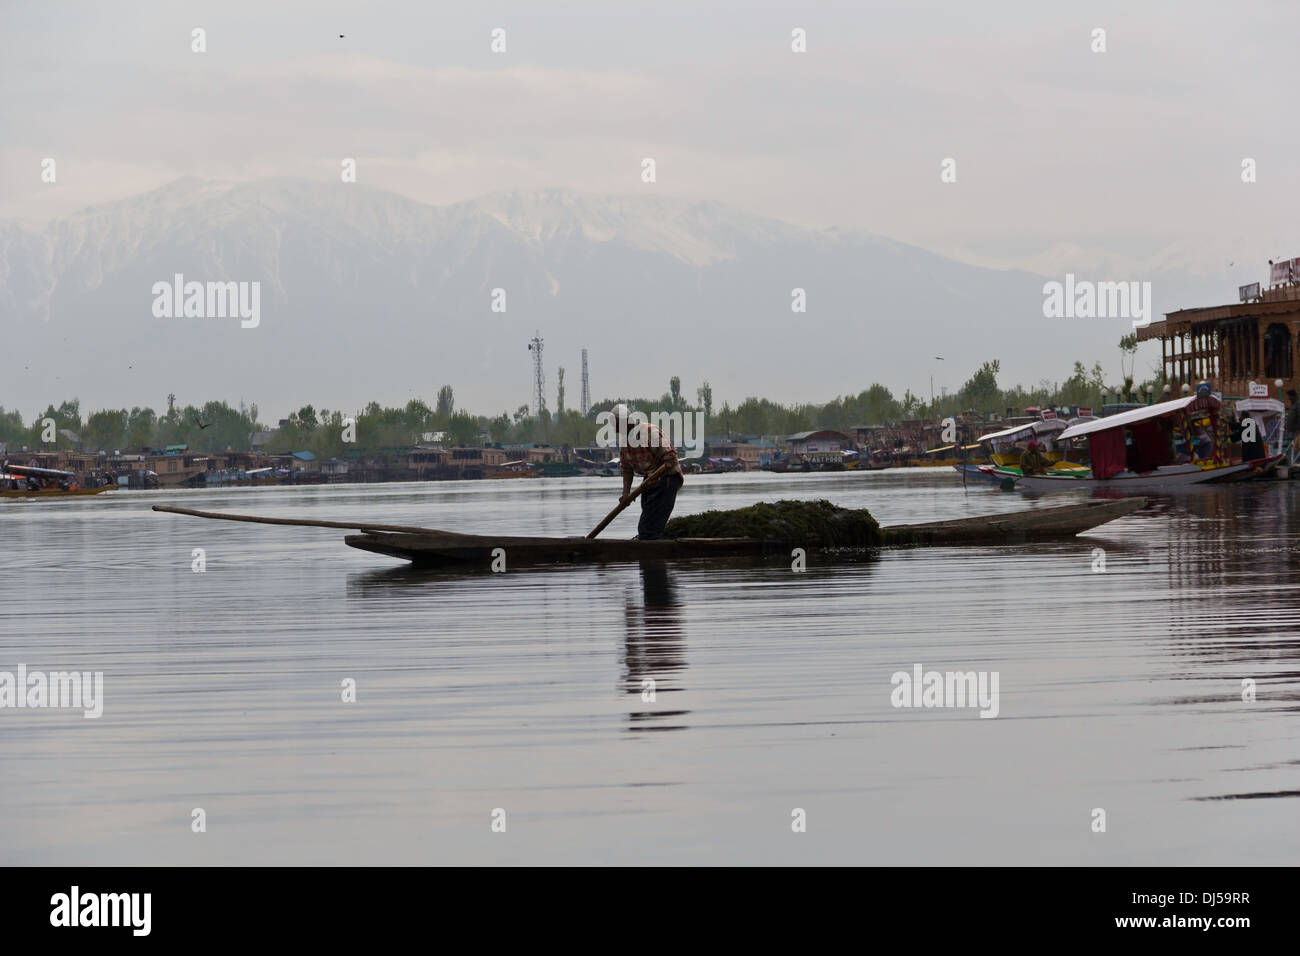 Man removing weeds from bottom of Dal Lake, Srinagar & boat laden with weeds that have been removed, required for health of lake Stock Photo